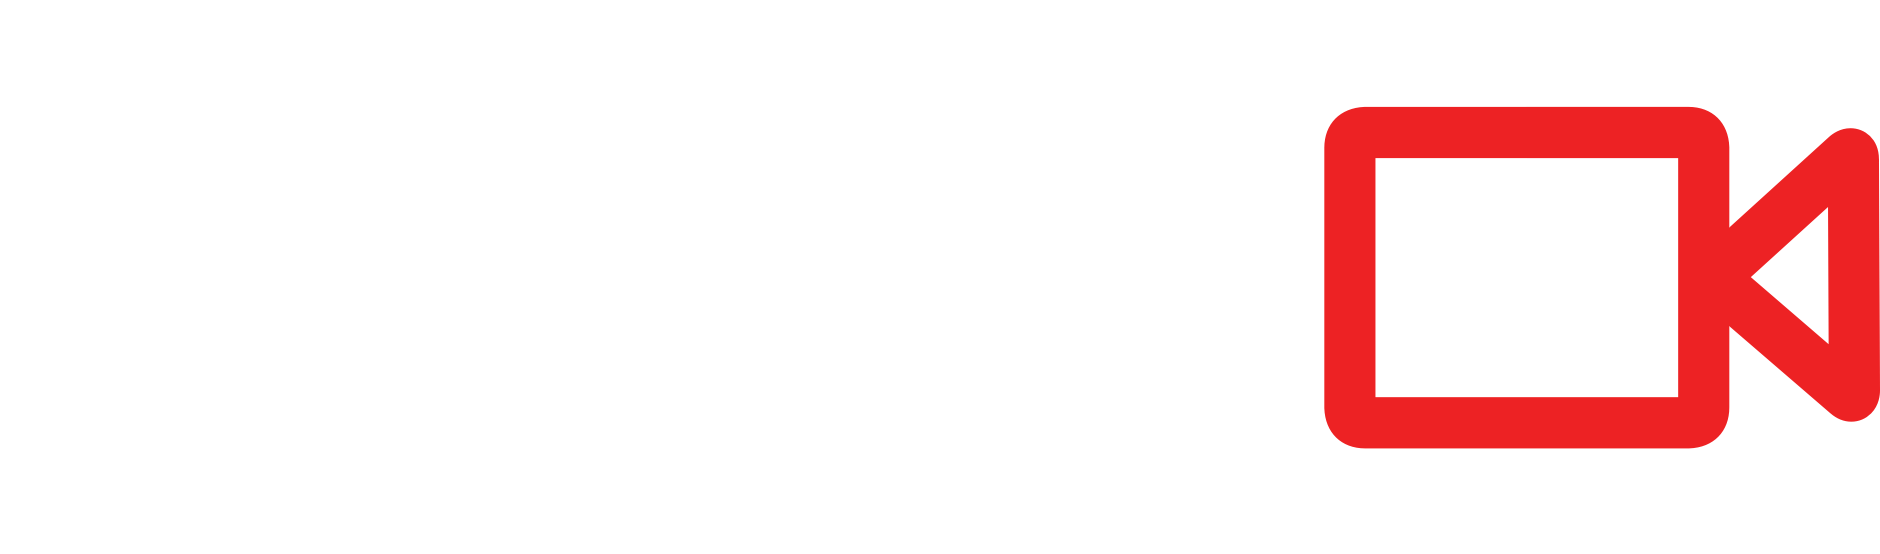 Pixelz - The home of expert camerawork and end-to-end production